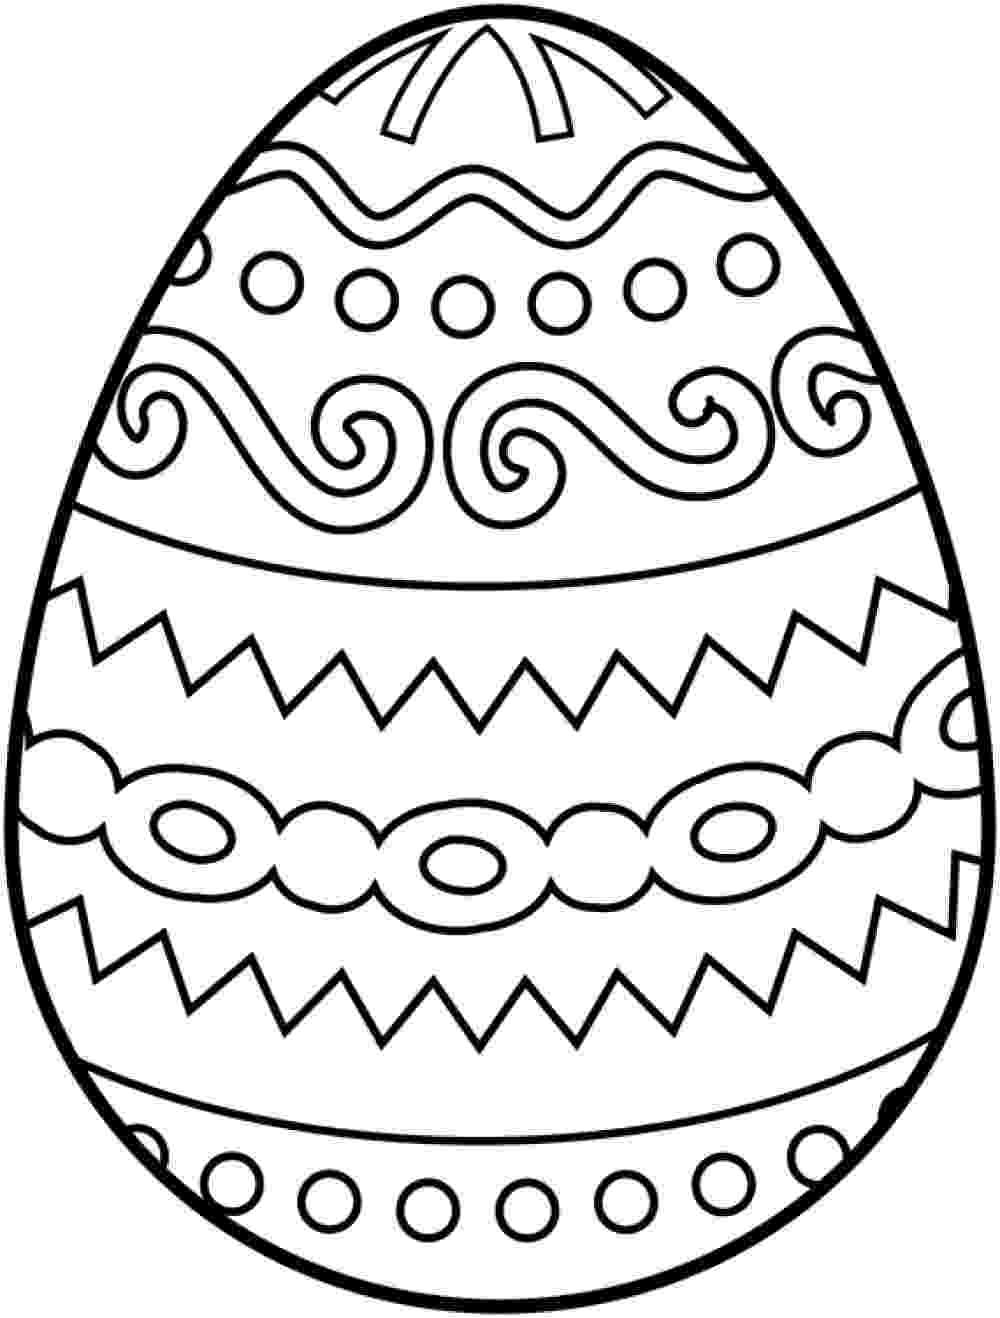 printable colouring pages of easter eggs easter coloring pages best coloring pages for kids of eggs printable easter colouring pages 